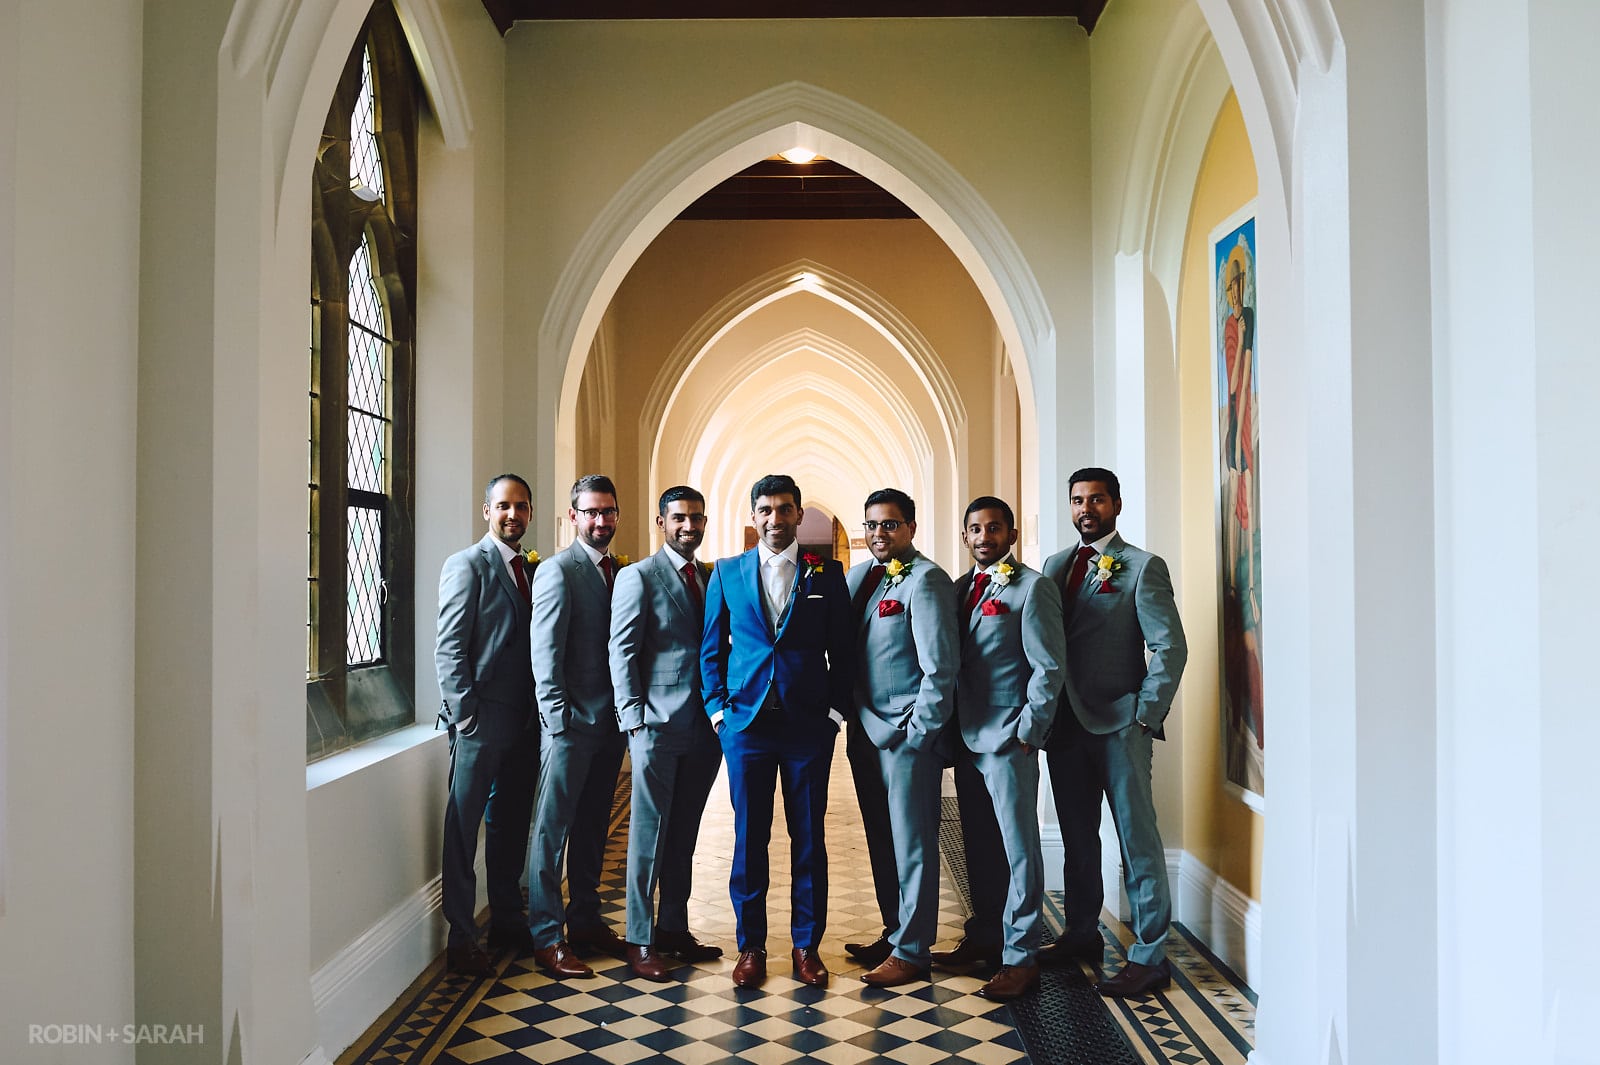 Wedding group photo in cloisters at Stanbrook Abbey, with groom and groomsmen